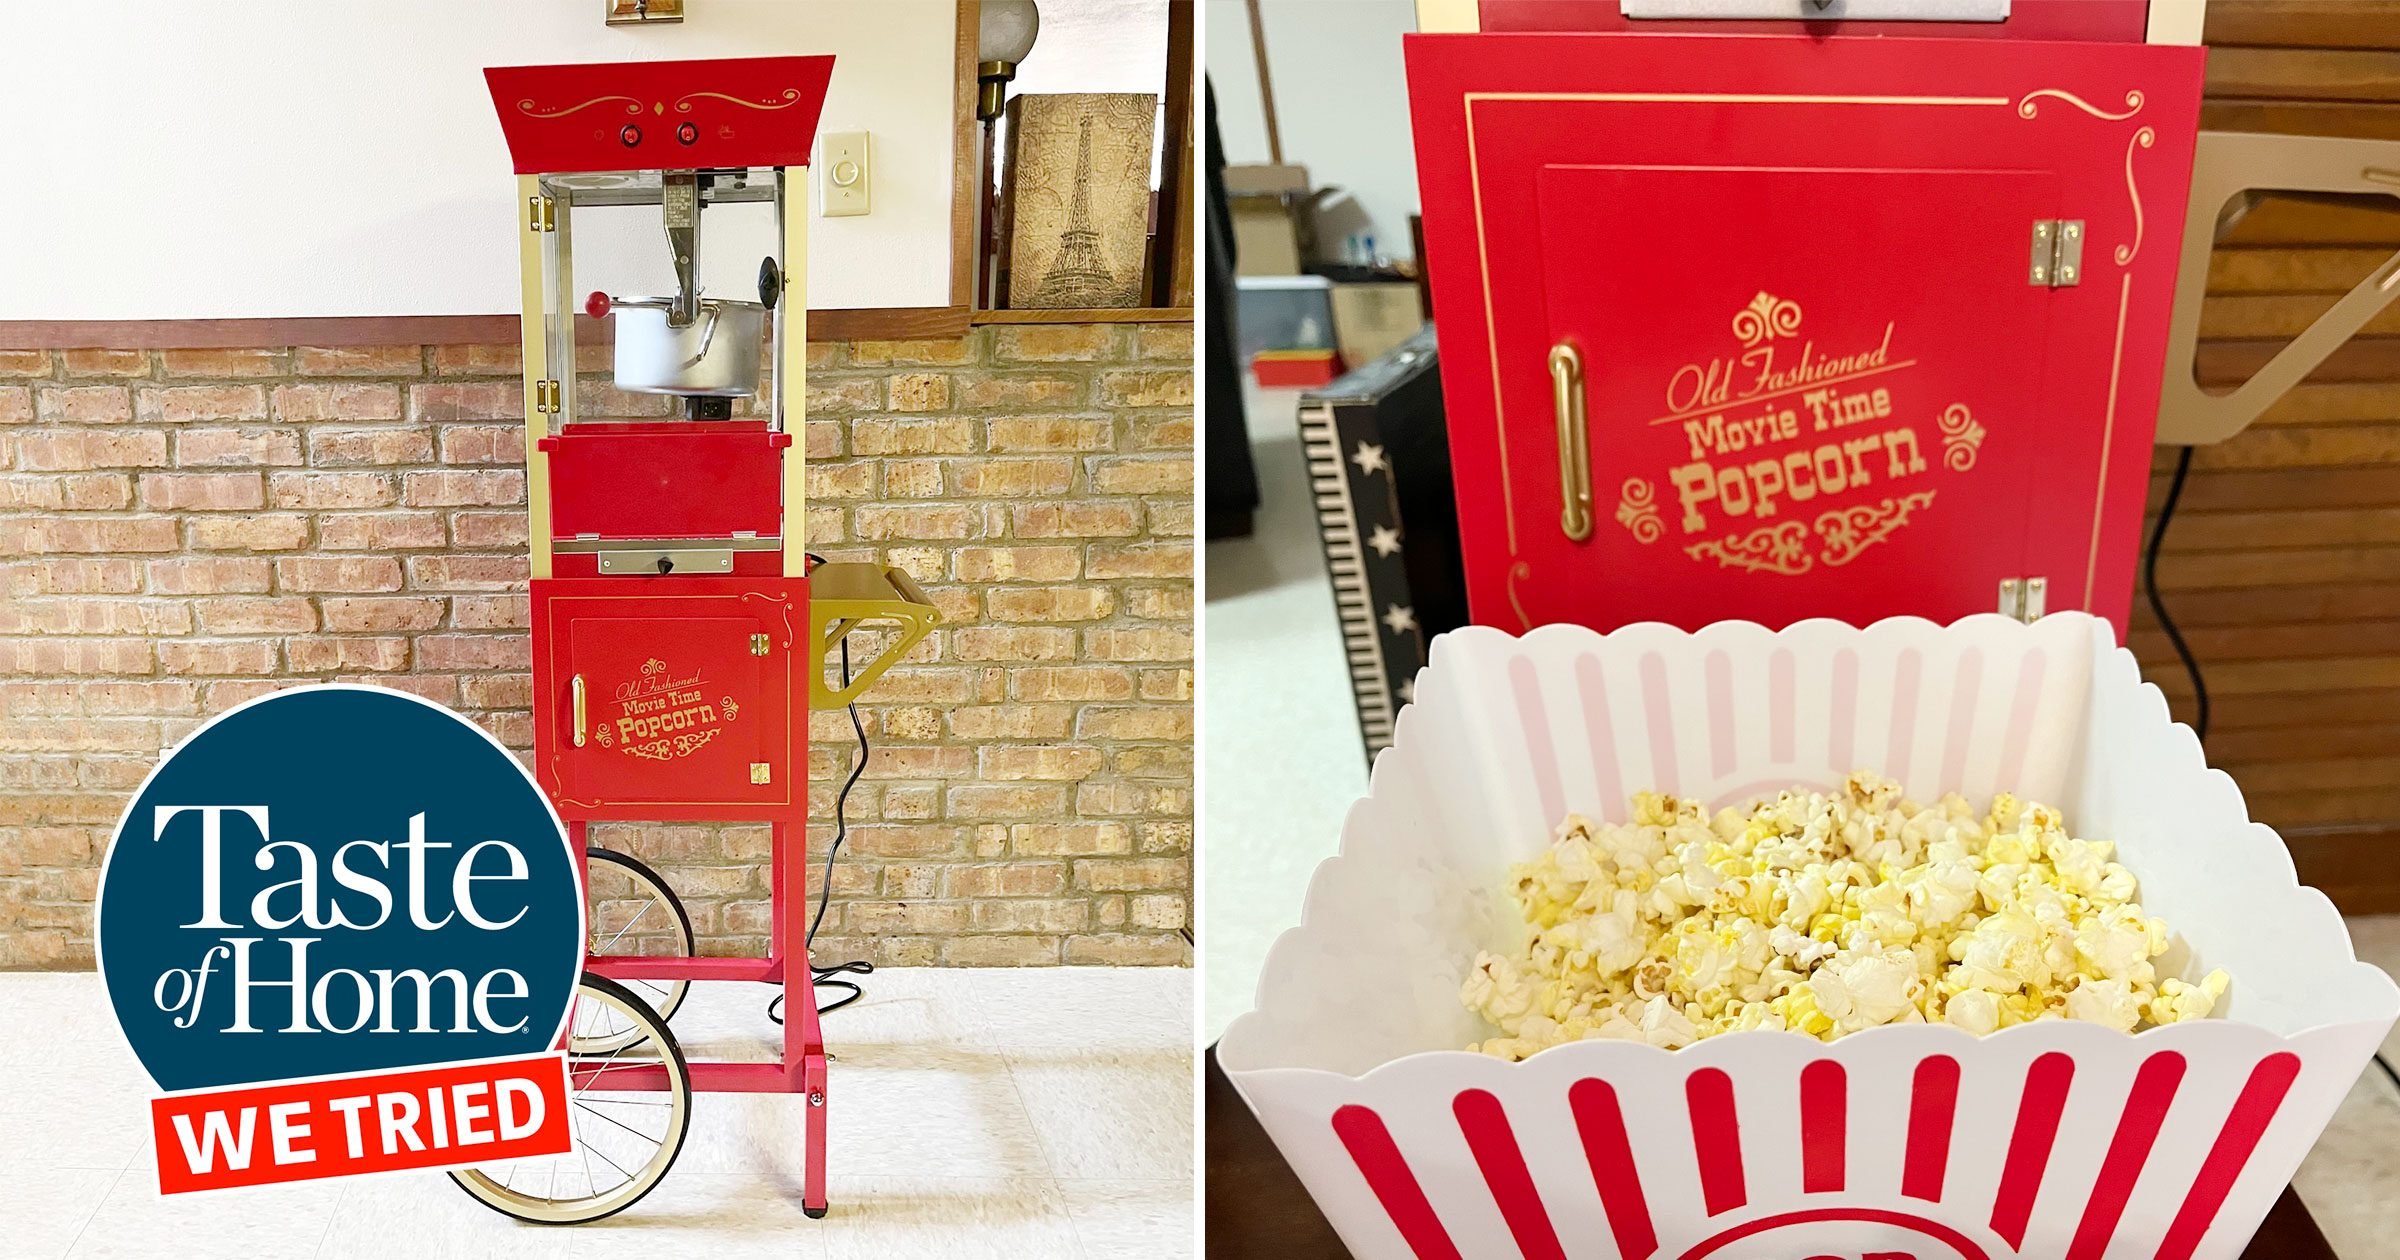 Nostalgia Popcorn Maker Machine - Professional Cart With 8 Oz Kettle Makes  Up to 32 Cups - Vintage Popcorn Machine Movie Theater Style - Red